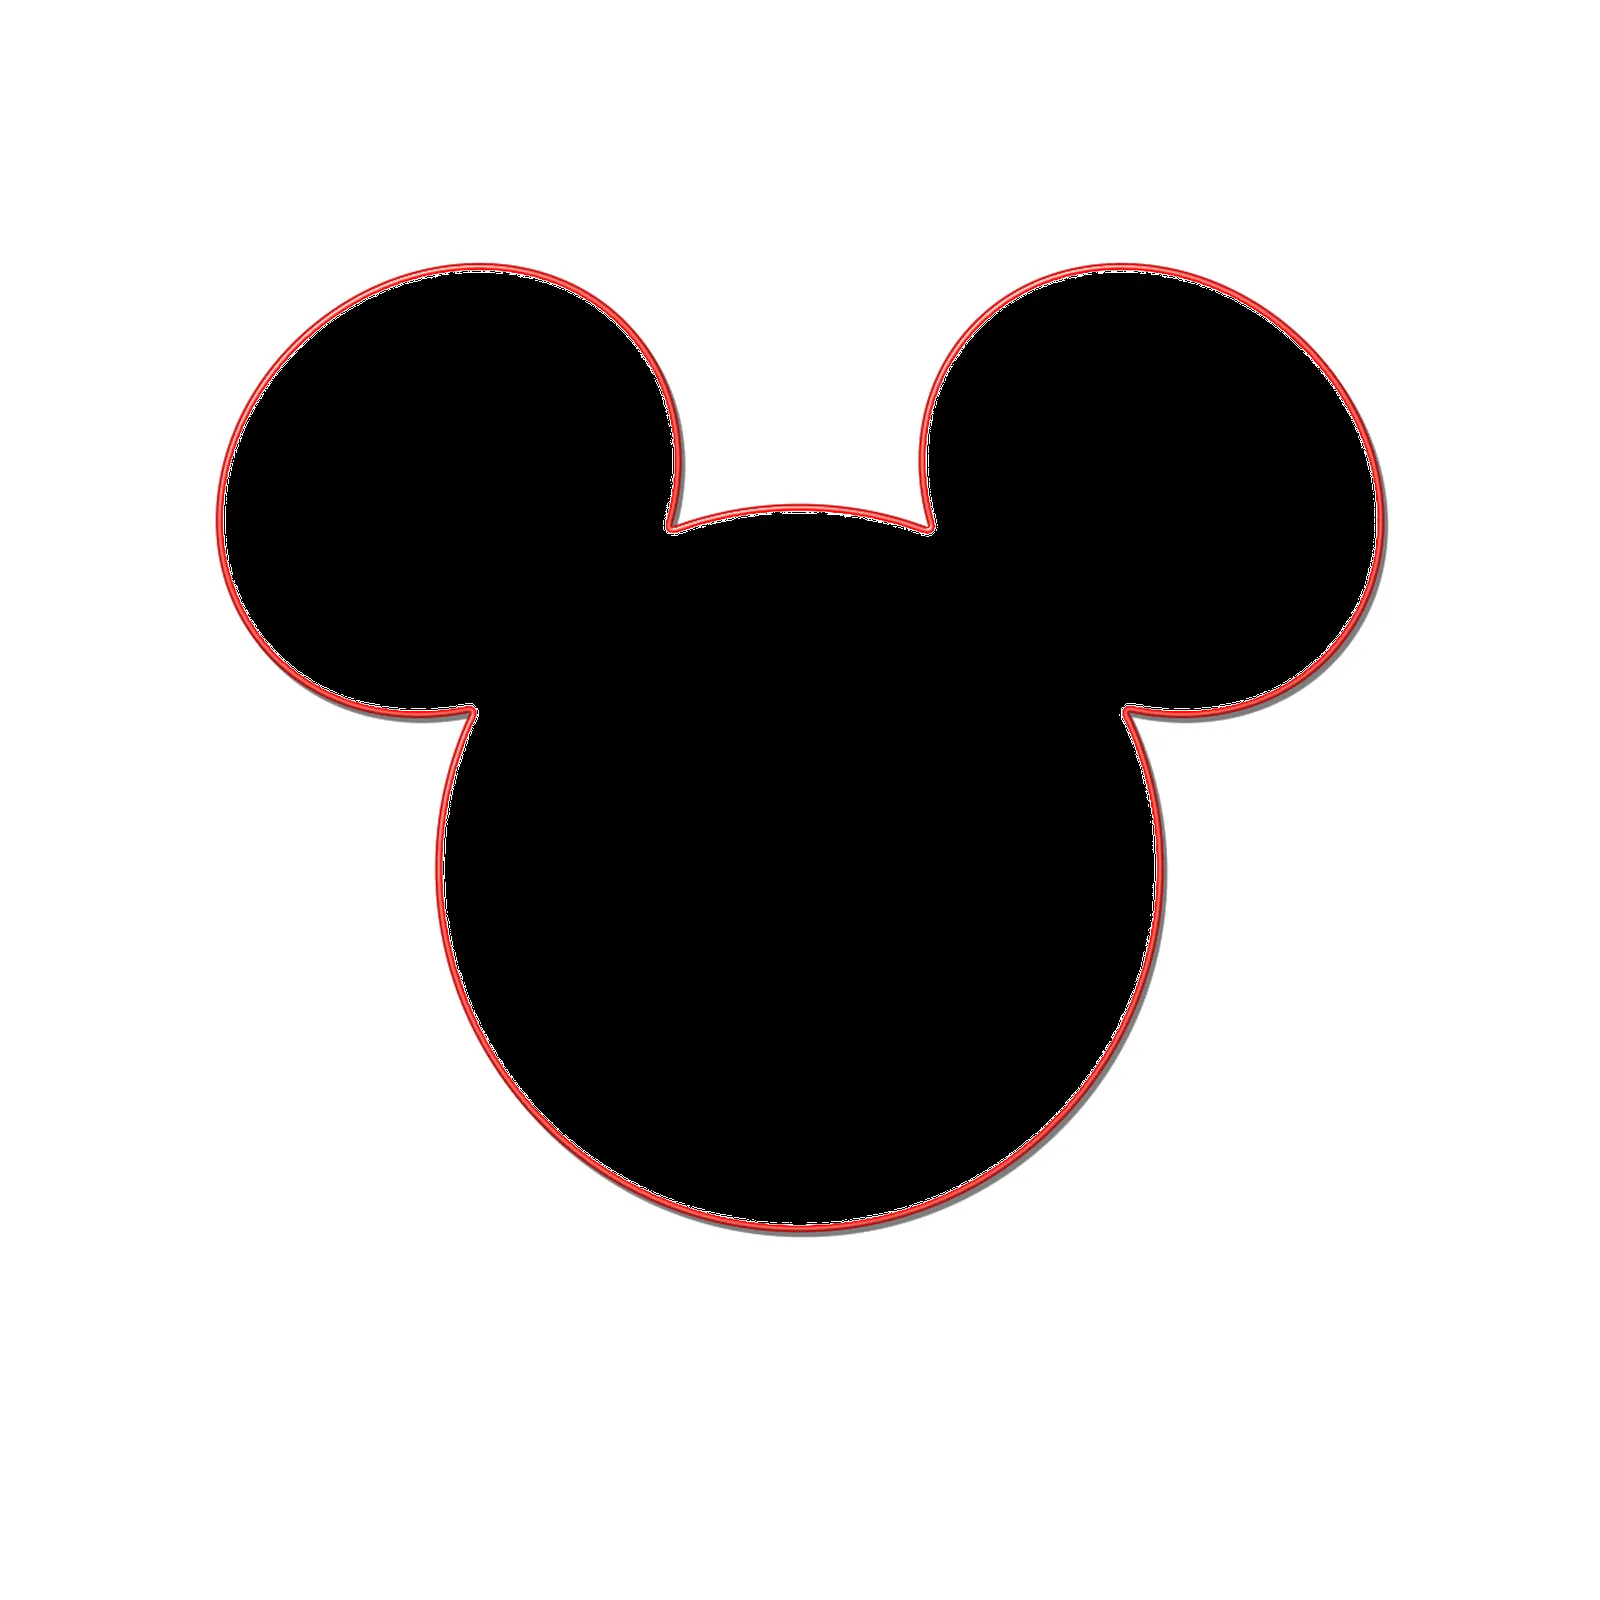 Mickey Mouse Ears Clip Art - ClipArt Best